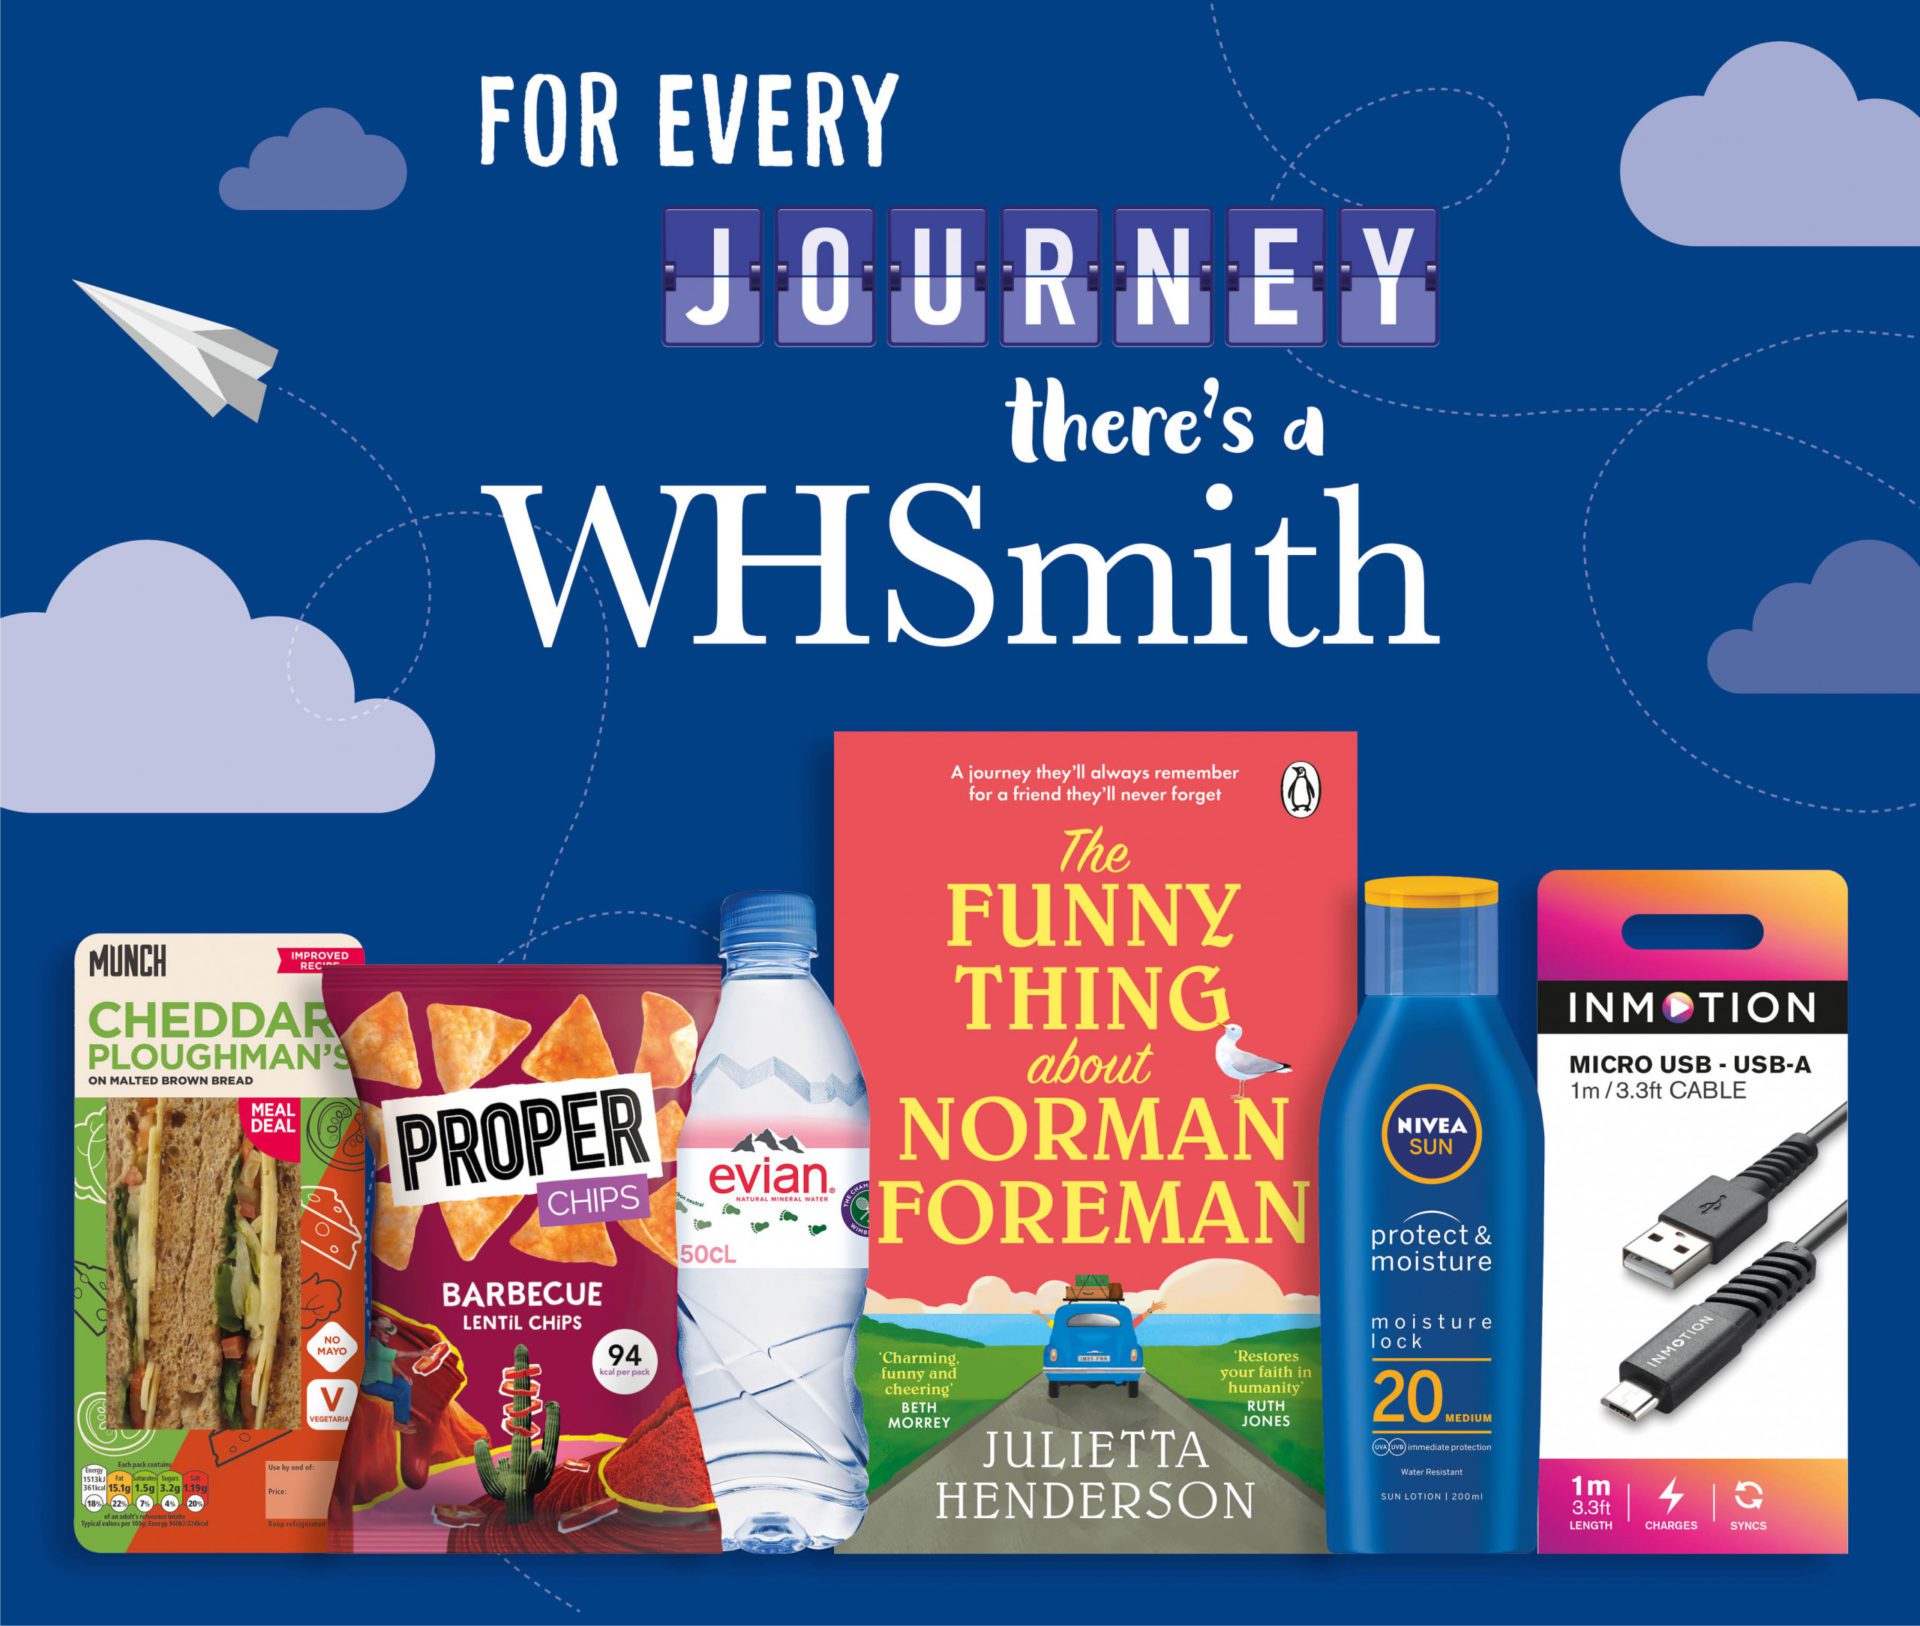 For every journey there's a WHSmith